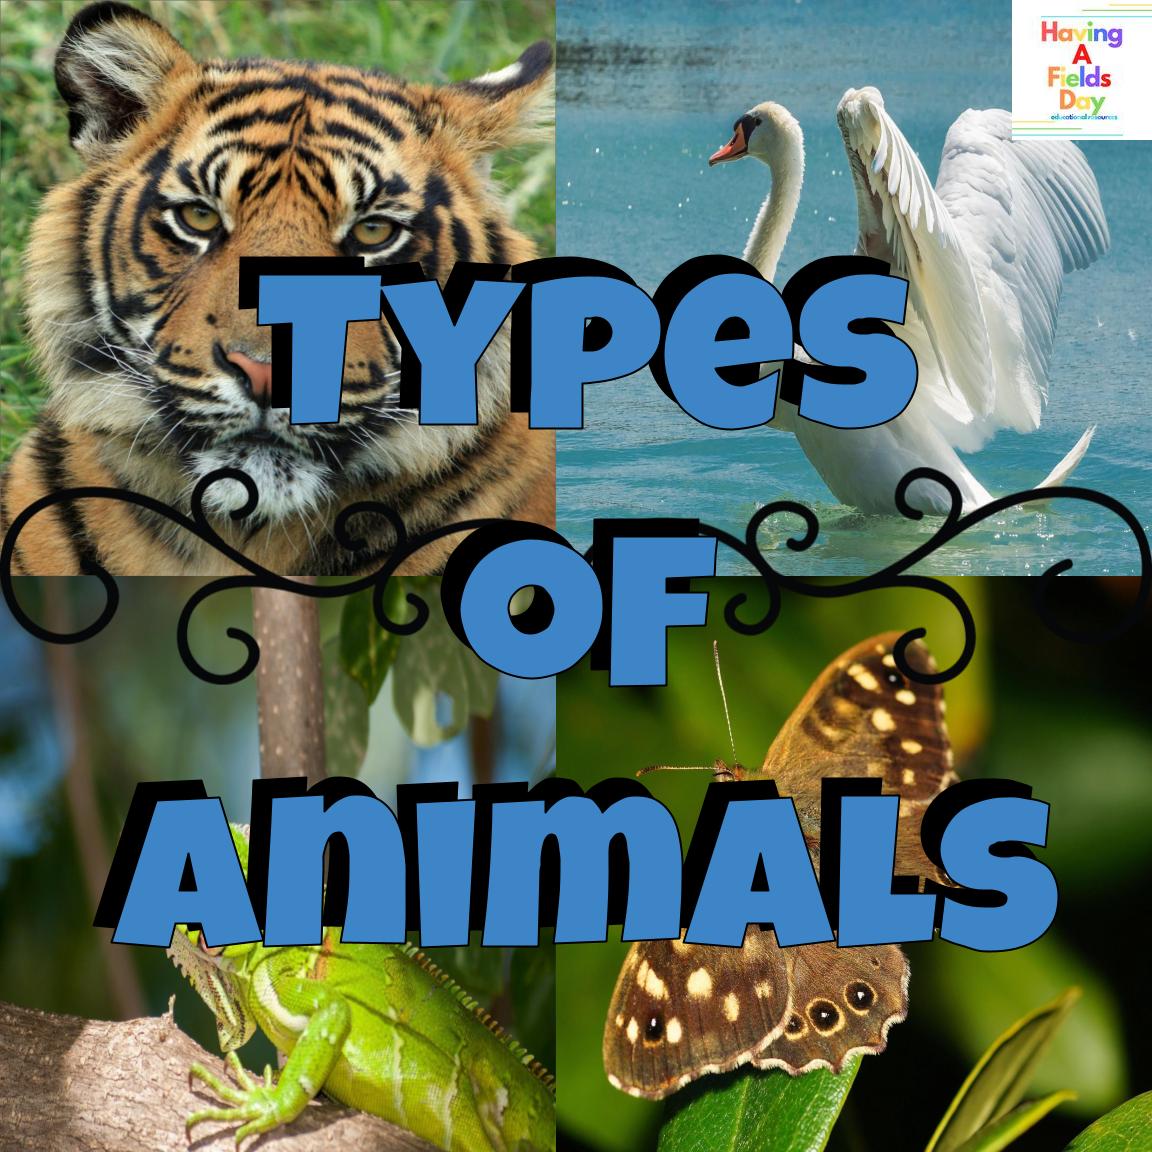 Types of Animals Mini Posters, Picture Task Cards, and Worksheets